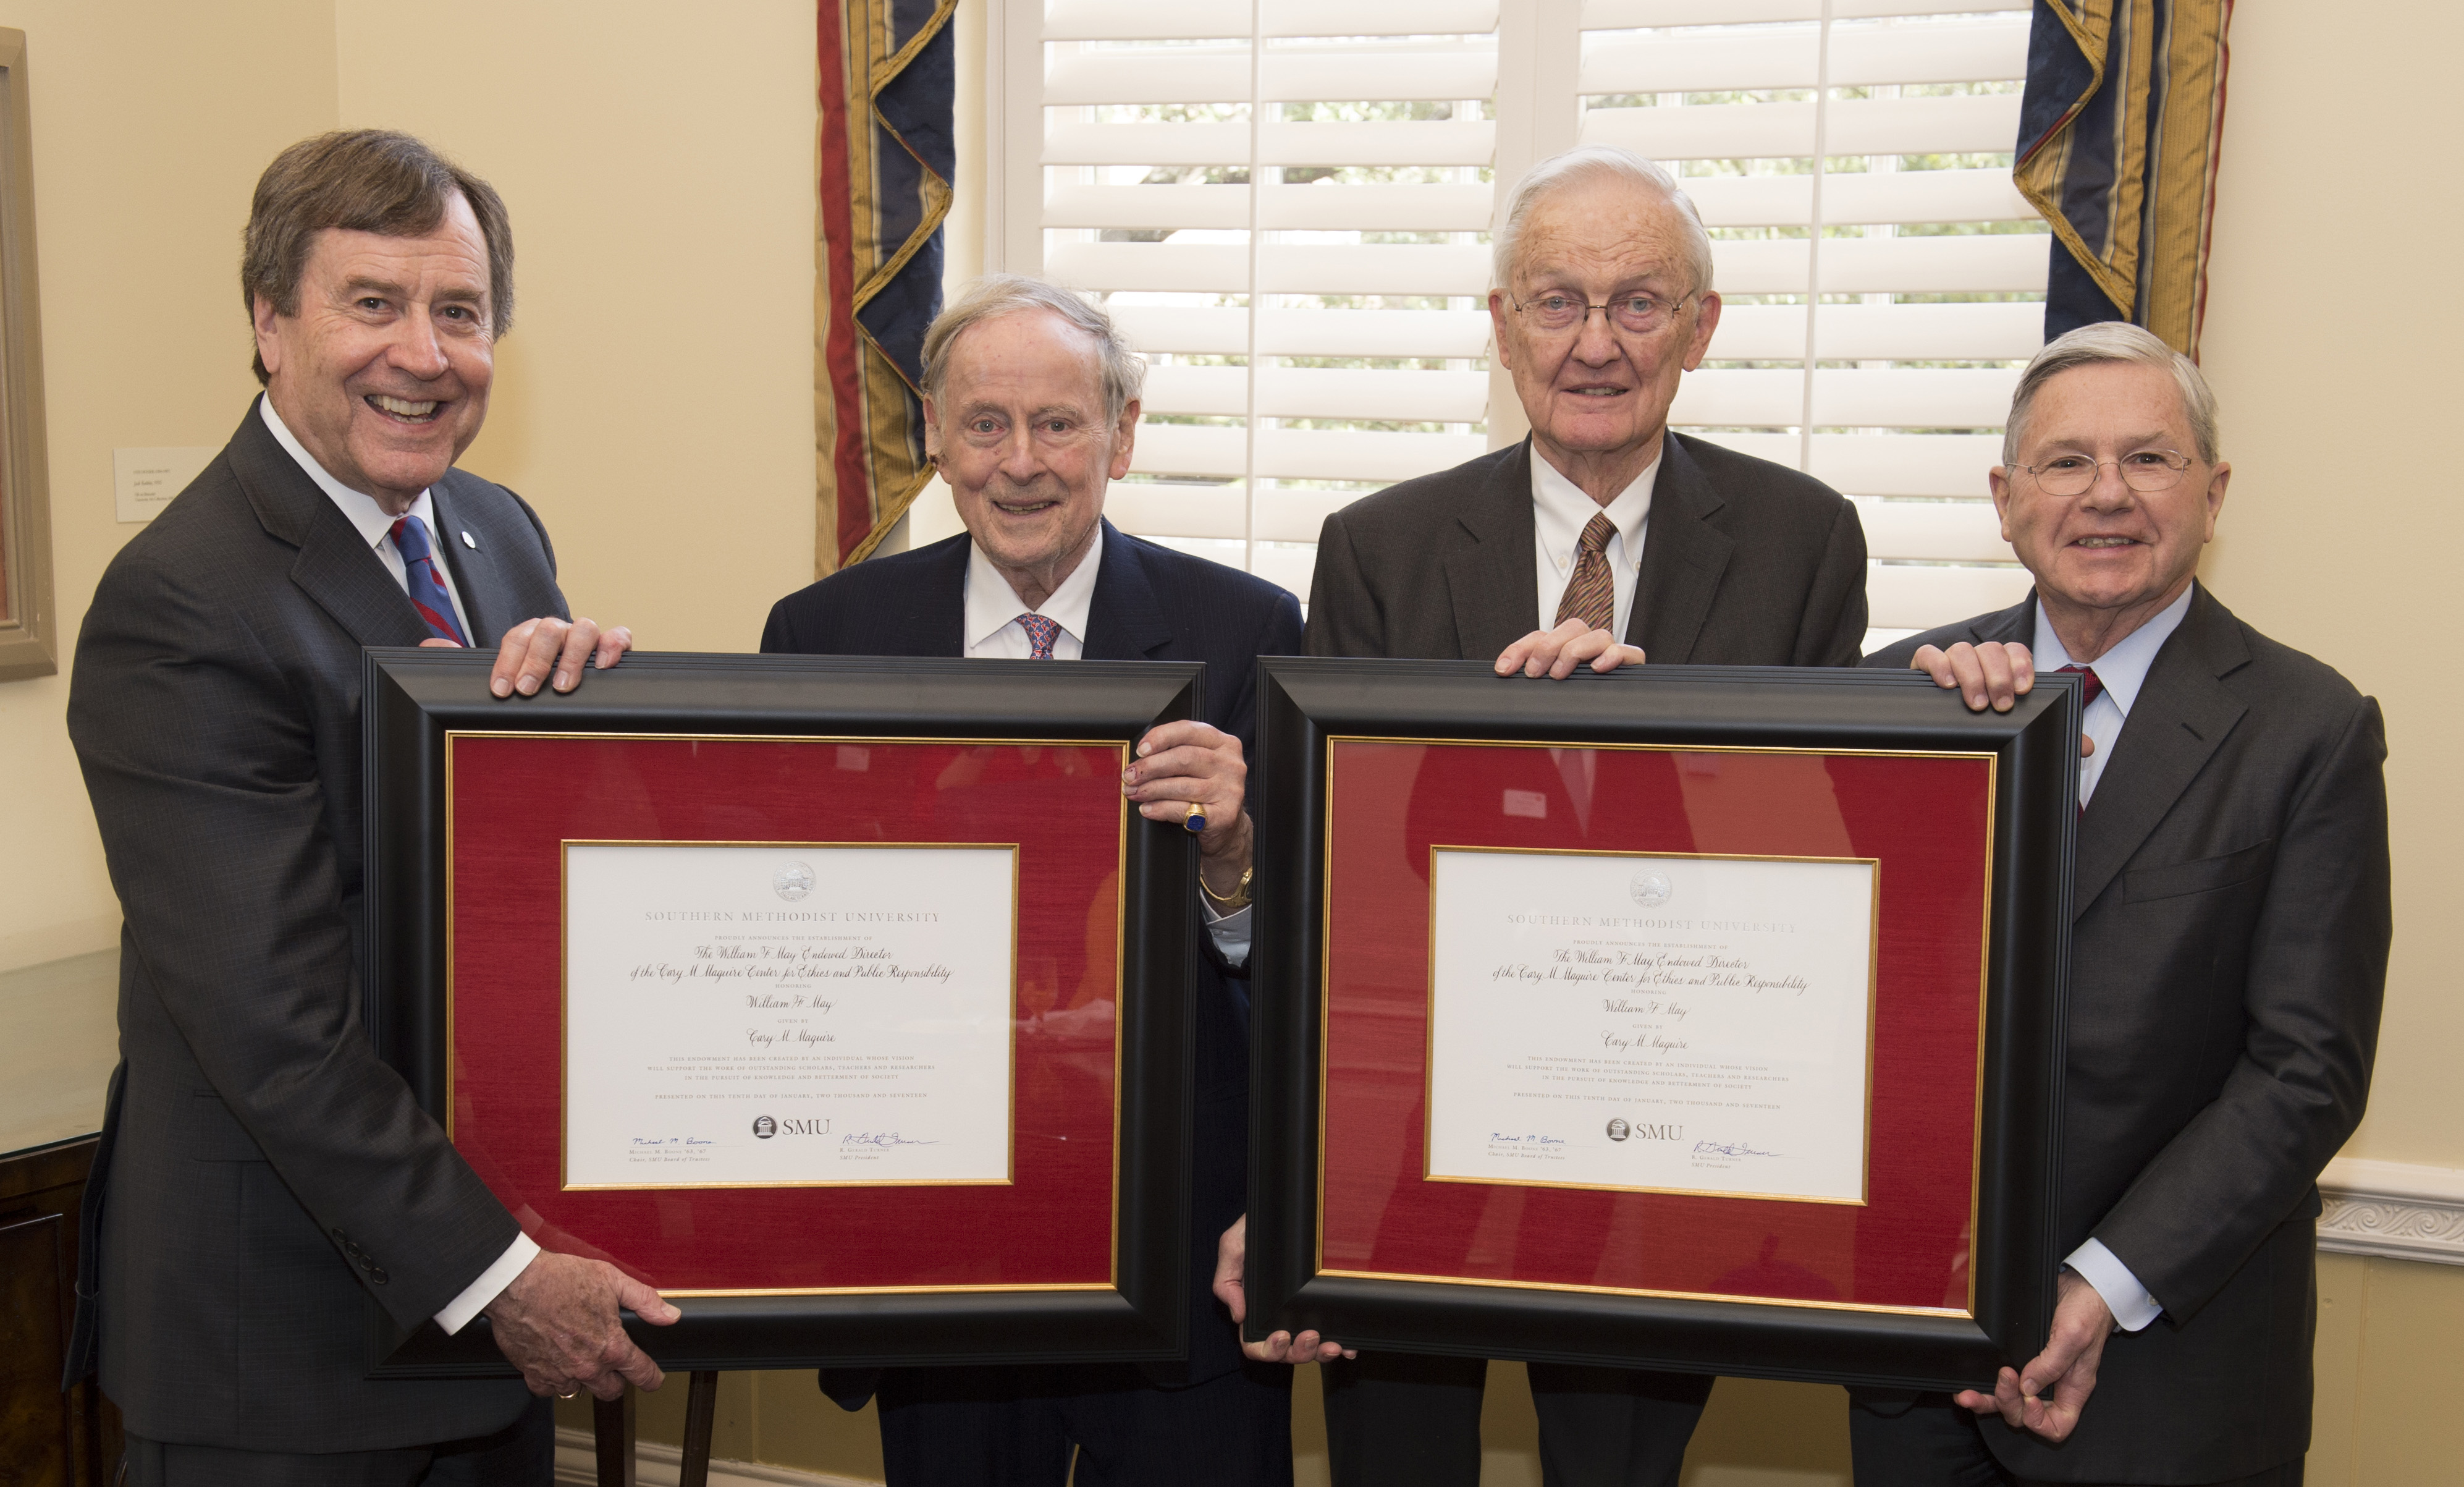 Left to right: President R. Gerald Turner, Cary M. Maguire, William F. May, Michael M. Boone.